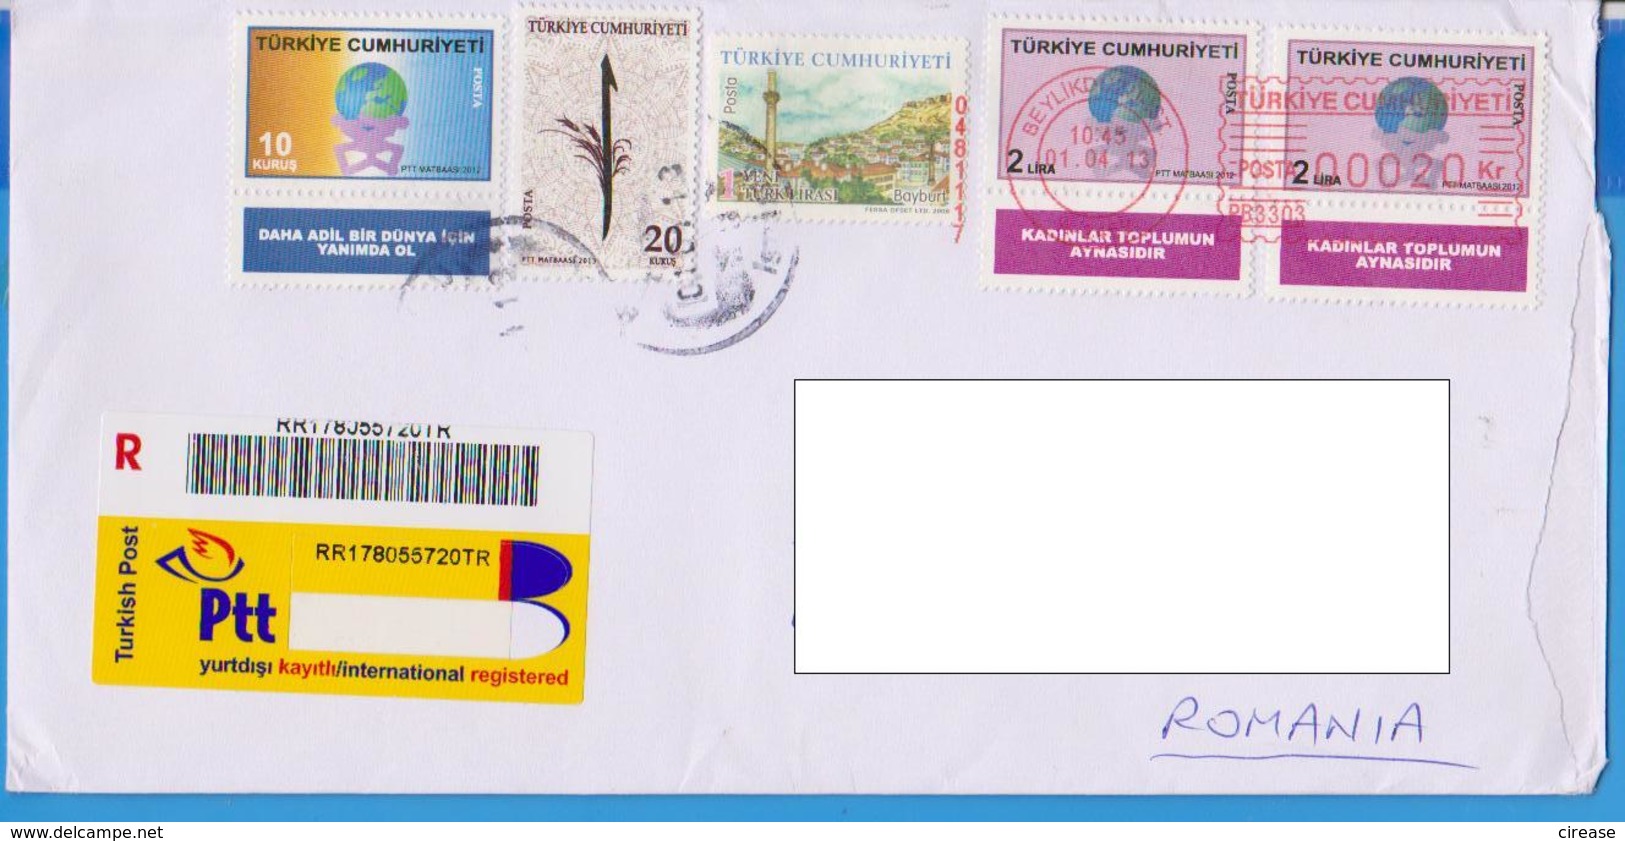 REGISTERED LETTER STAMPS ARCHITECTURE MOSQUE MAPS EARTH PERSONALITIES TURKEY SENT ROMANIA - Covers & Documents